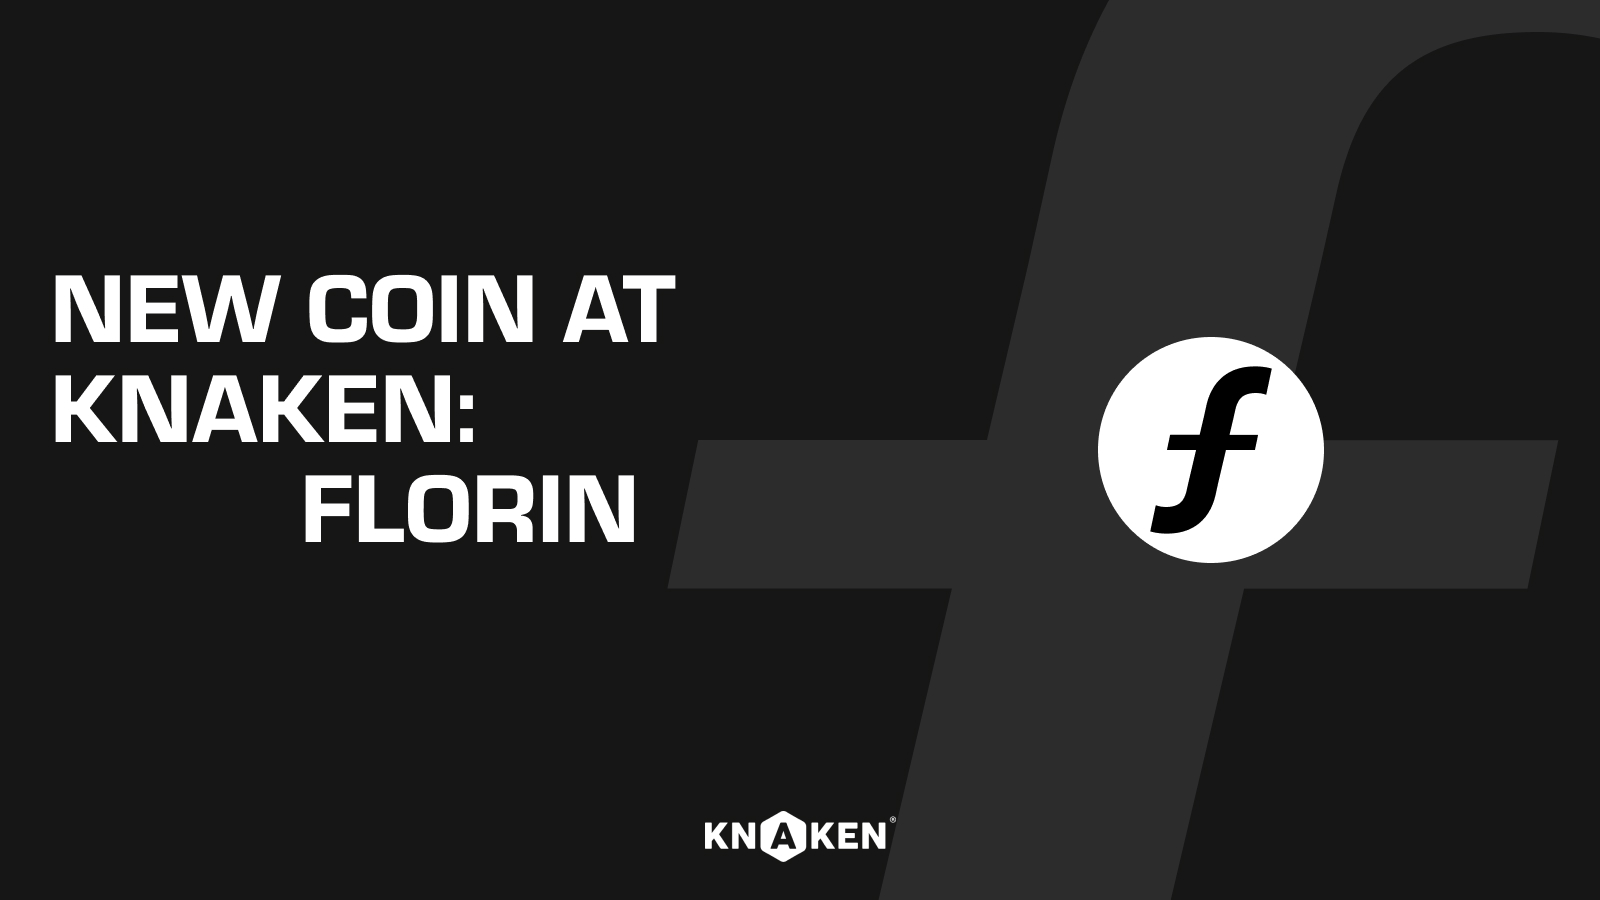 Florin ($XFL) now available on Knaken - prepare for launch on July 4